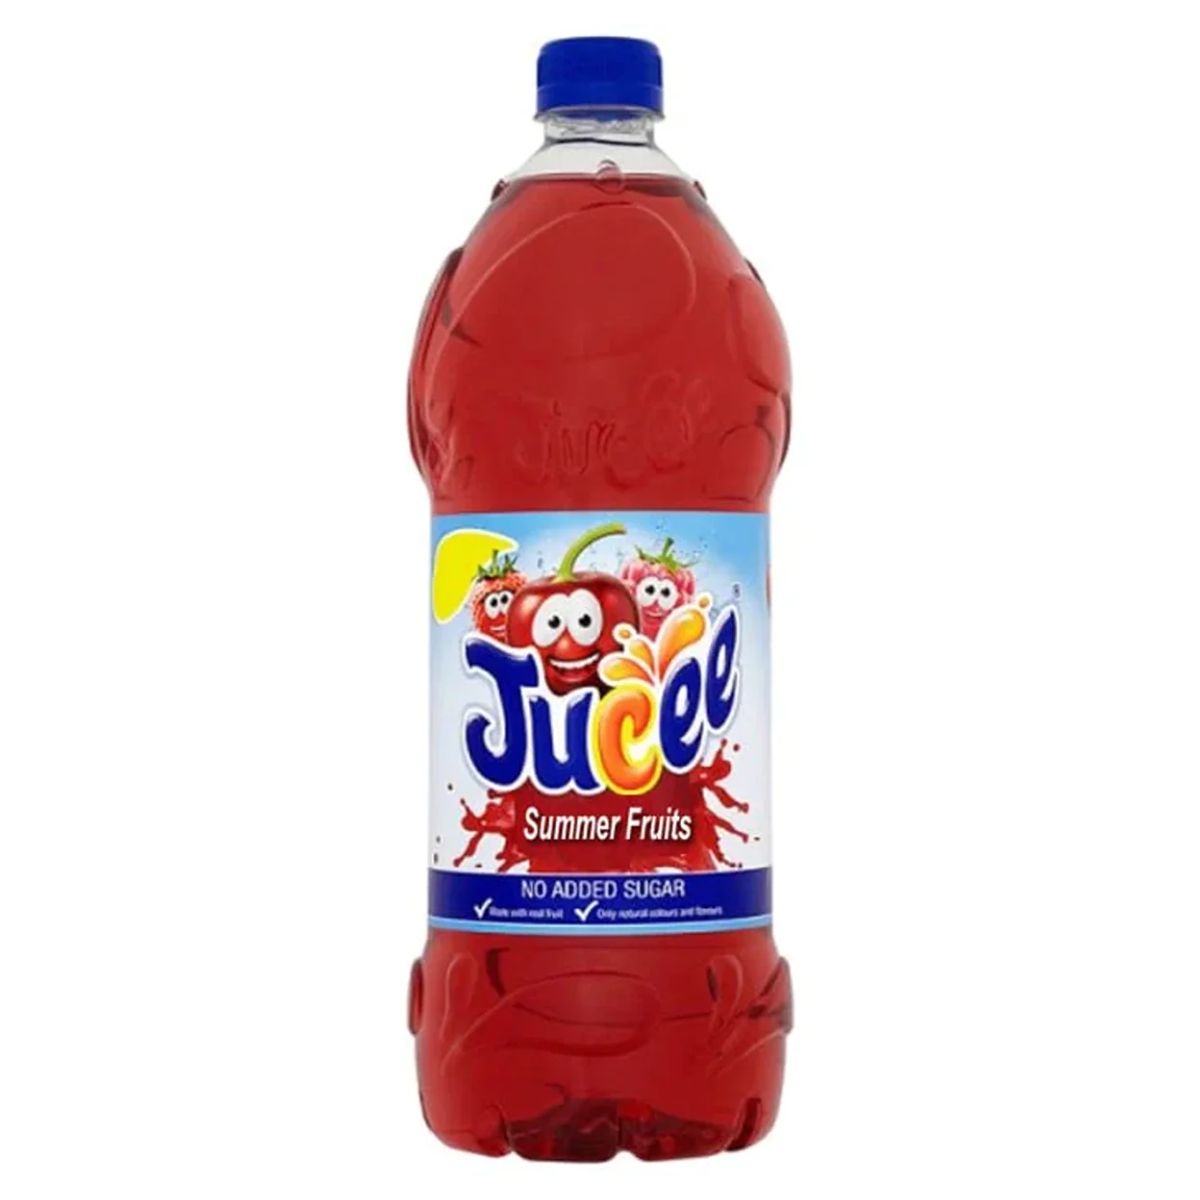 A bottle of Jucee - Summer Fruits Squash - 1.5L drink with a 'no added sugar' label.